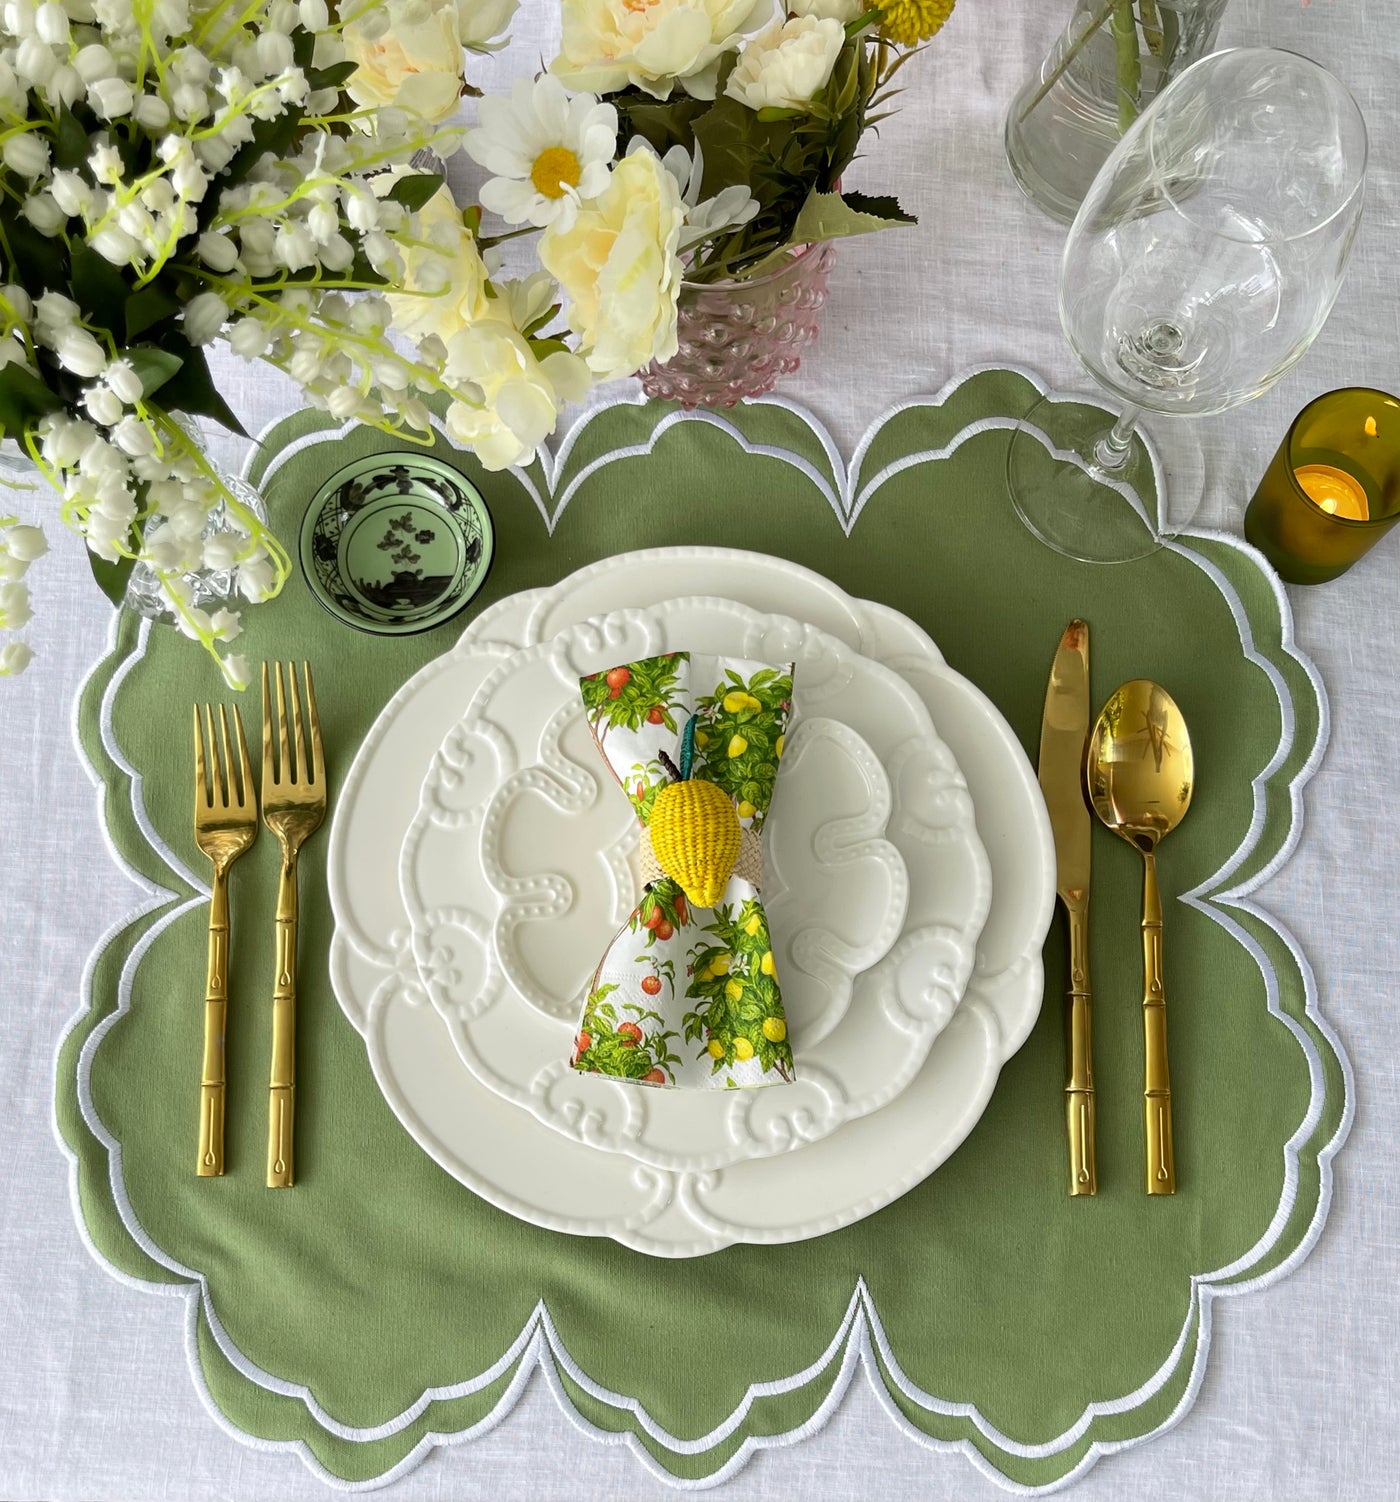 'High Tea' Placemat and Napkin Set - Soft Green Scalloped